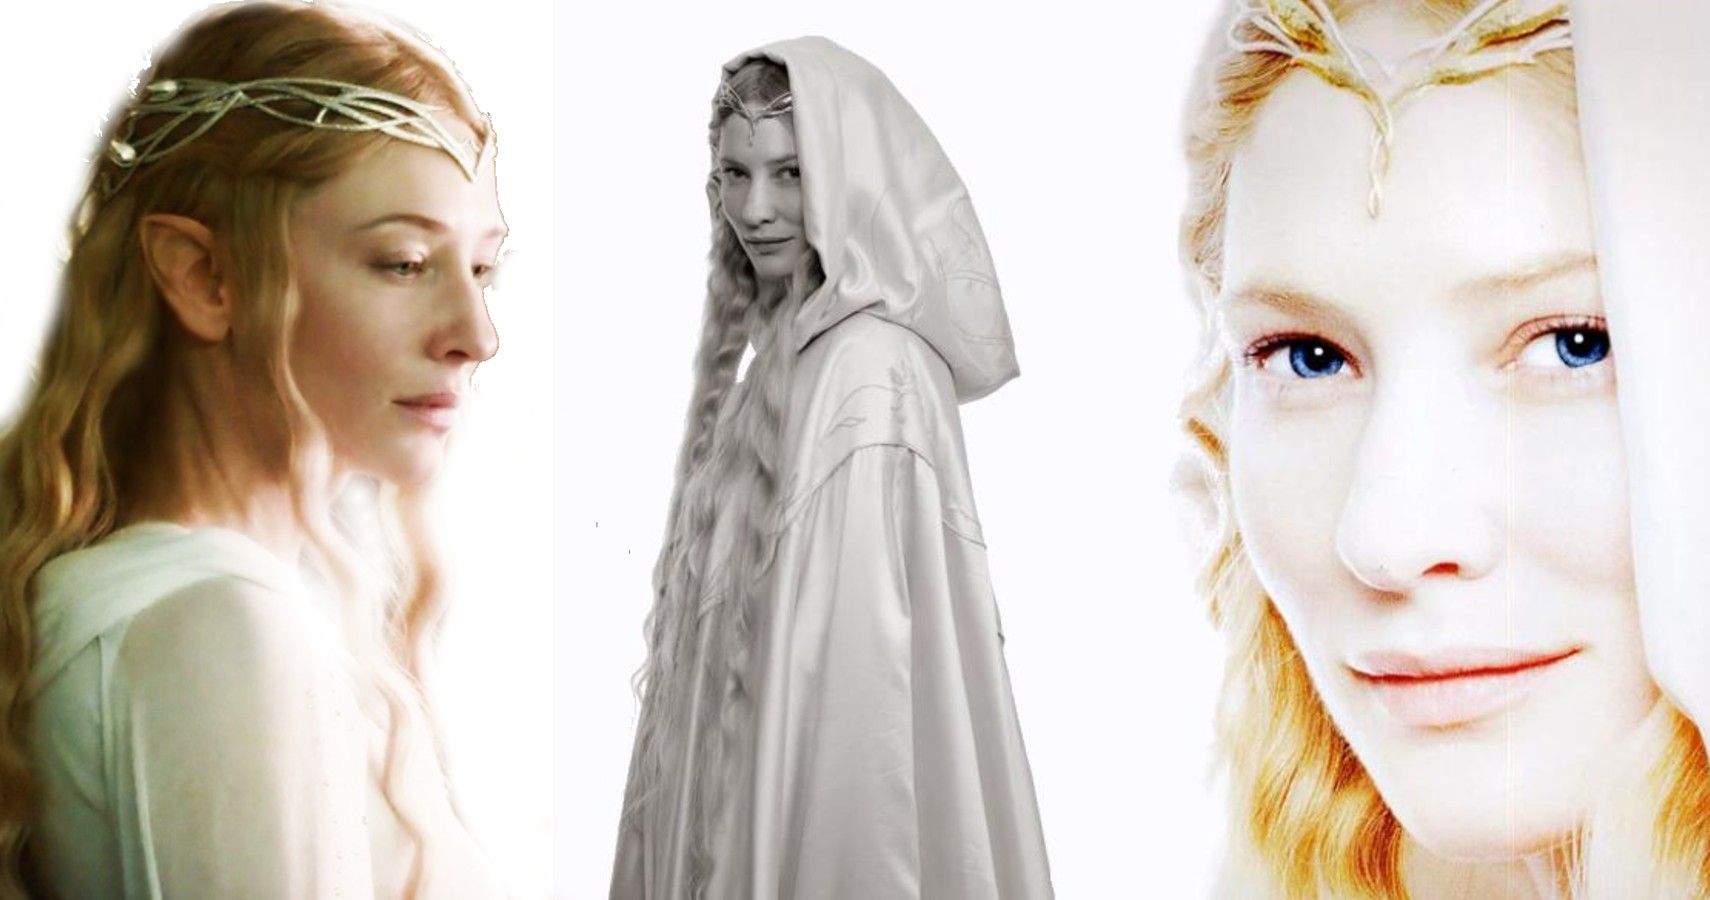 Lord of the Rings Series Casts Young Galadriel Actor in Morfydd Clark